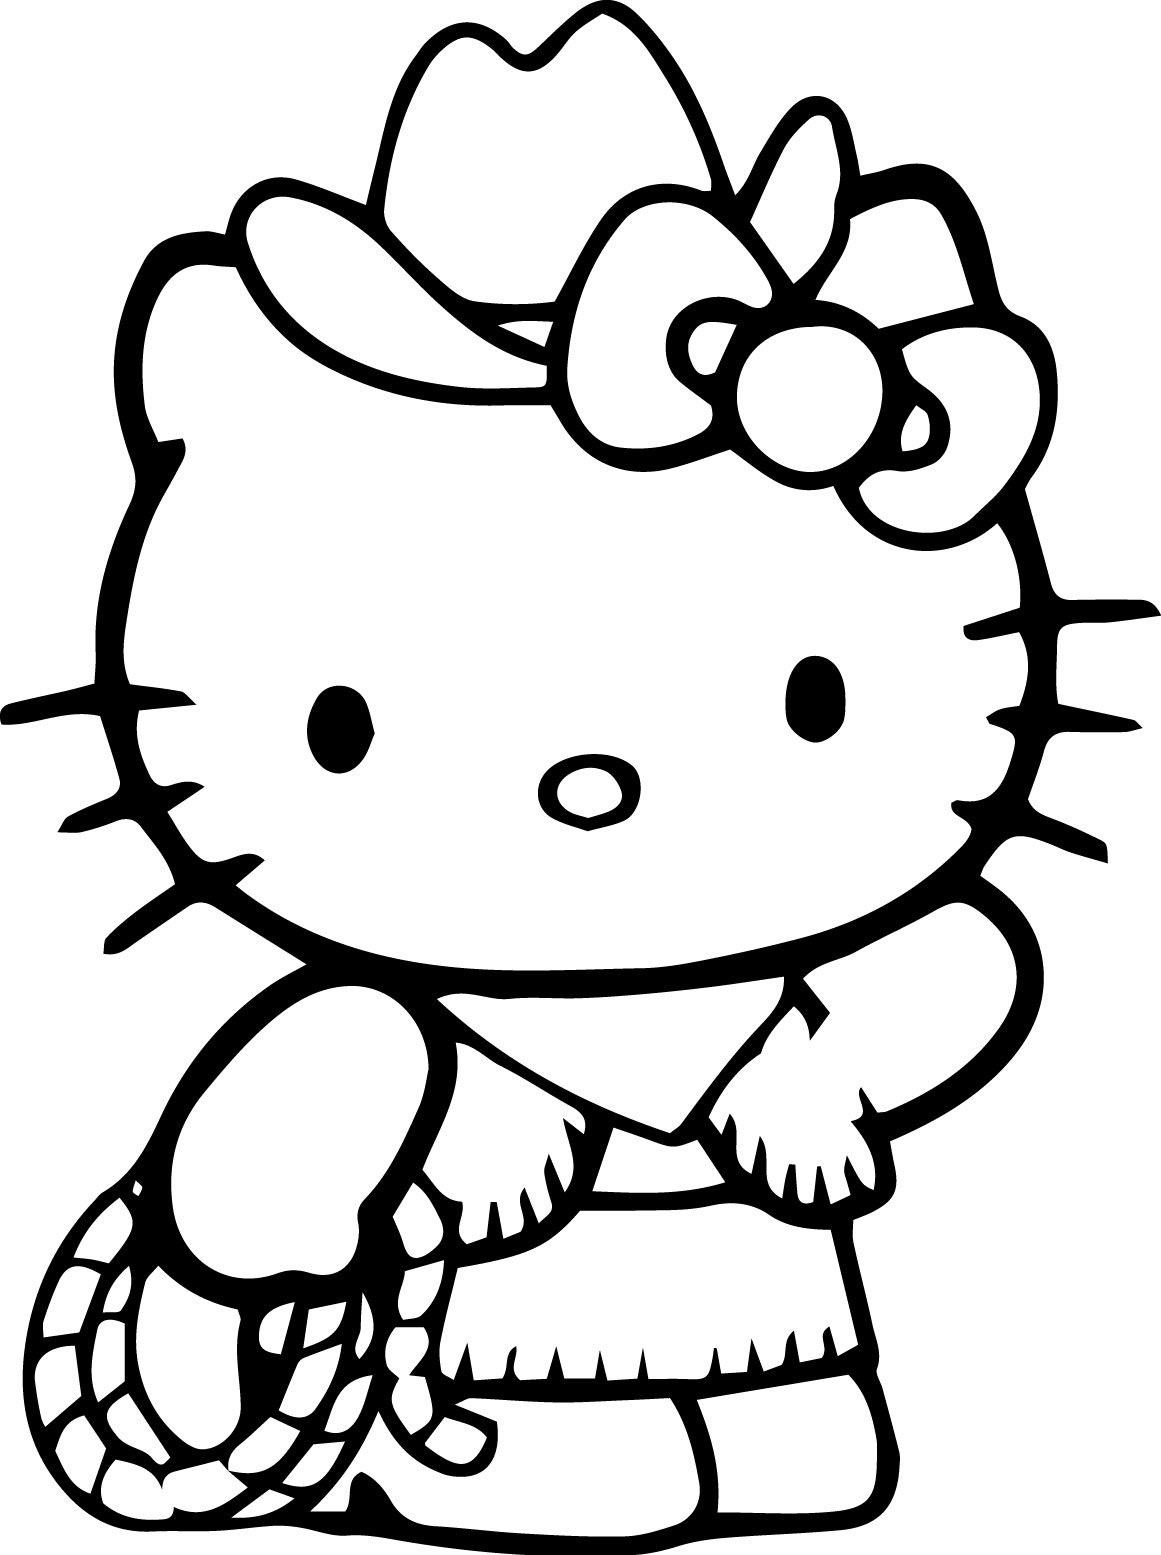 hel11jpg 11611555  Hello kitty colouring pages Hello kitty 